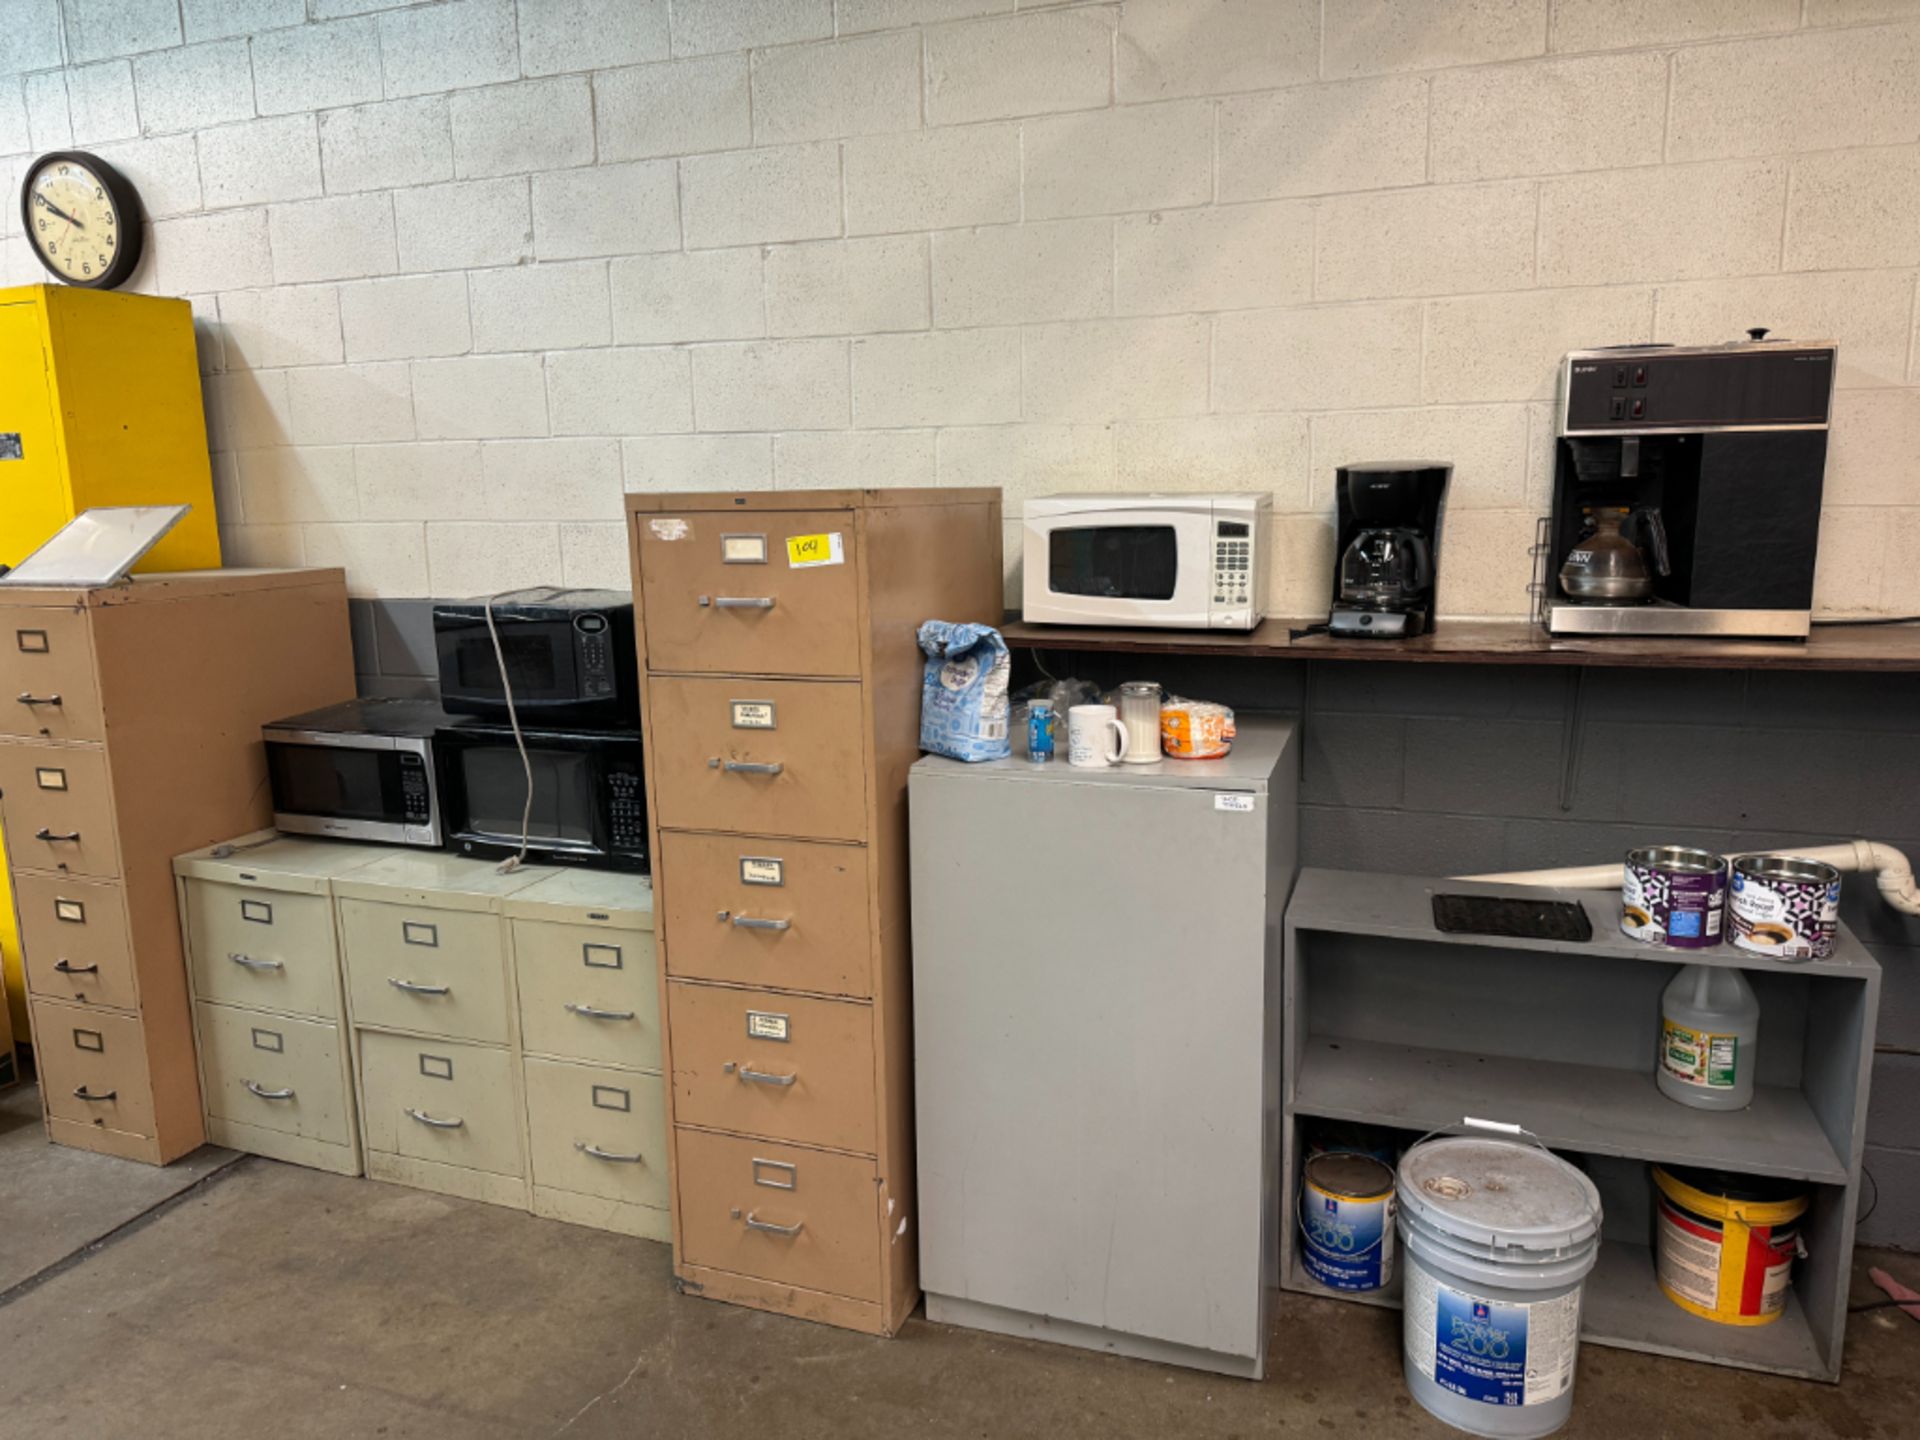 File Cabinets, Microwaves, Coffee Maker Cabinets w/ Shop Rags